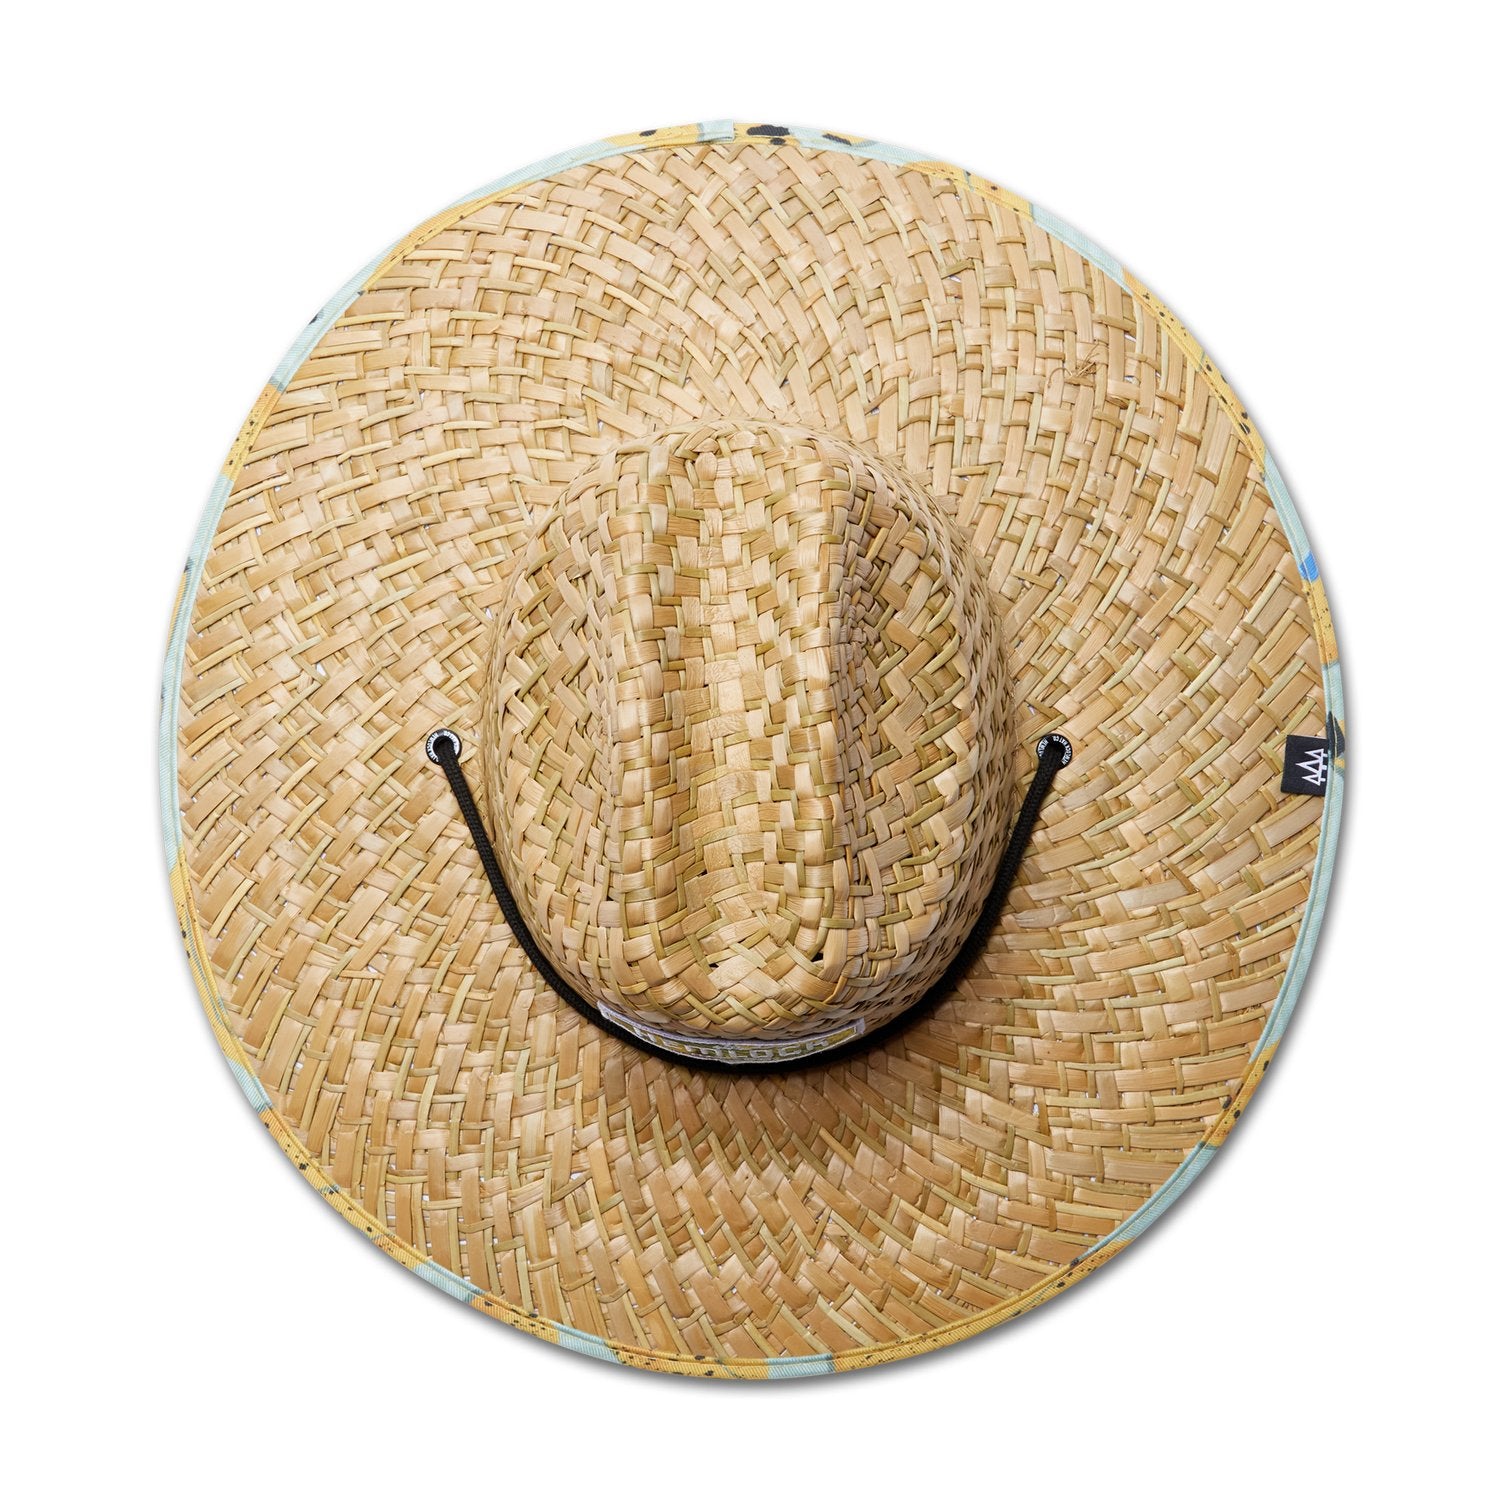 Extra Wide Brim Summer Straw Hats Wholesale, 51% OFF